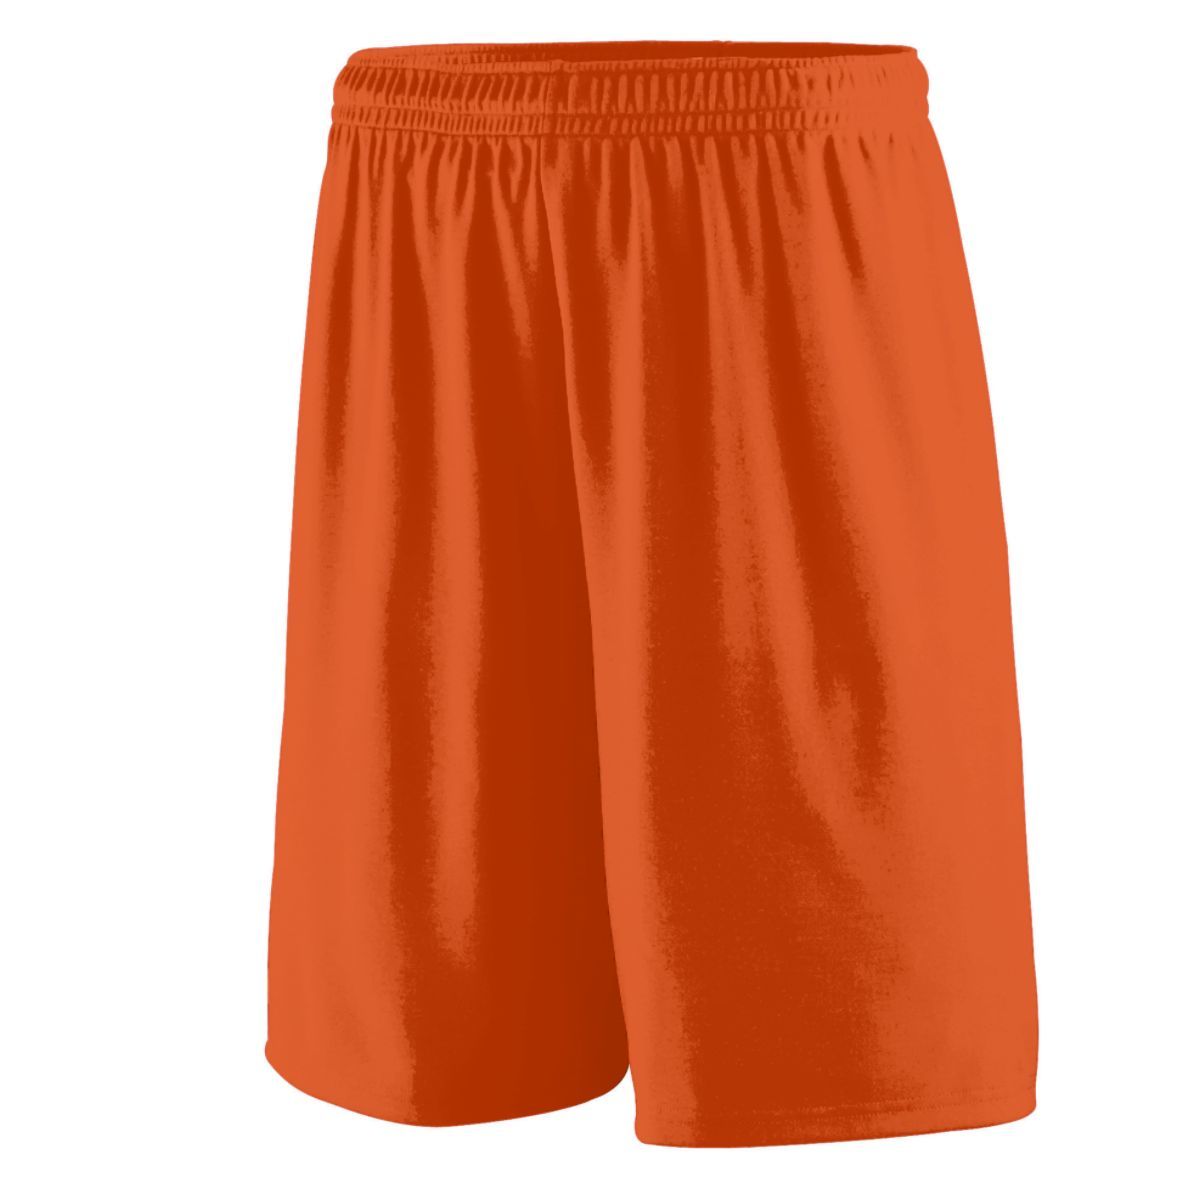 Augusta Sportswear Training Shorts in Orange  -Part of the Adult, Adult-Shorts, Augusta-Products product lines at KanaleyCreations.com